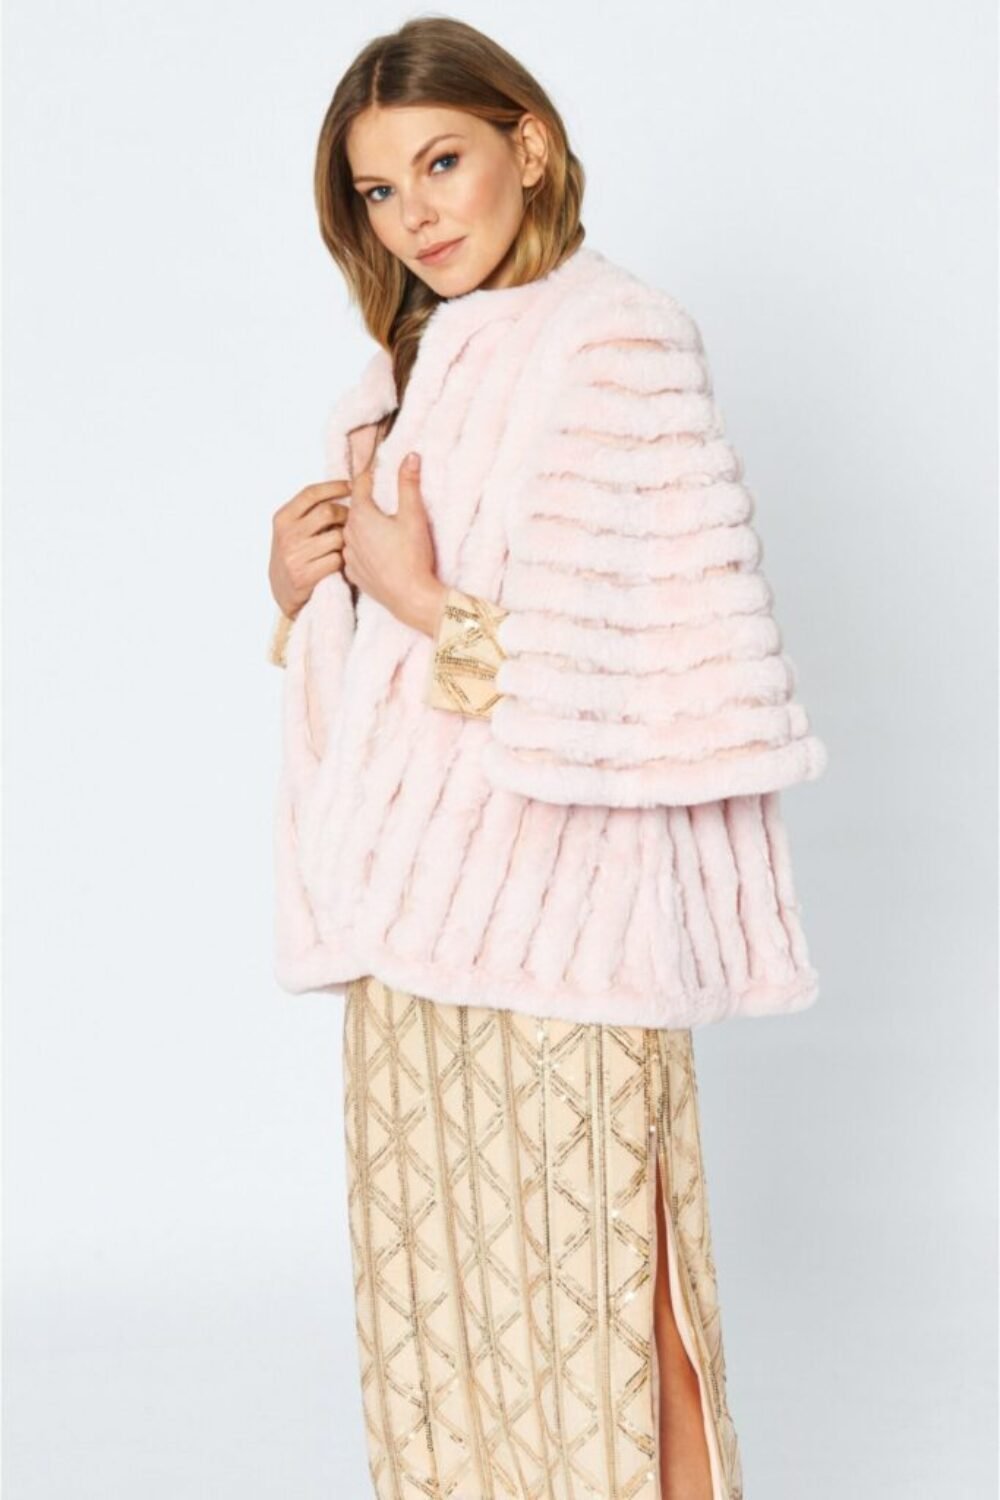 Shop Lux Pink Faux Fur Striped Coat and women's luxury and designer clothes at www.lux-apparel.co.uk